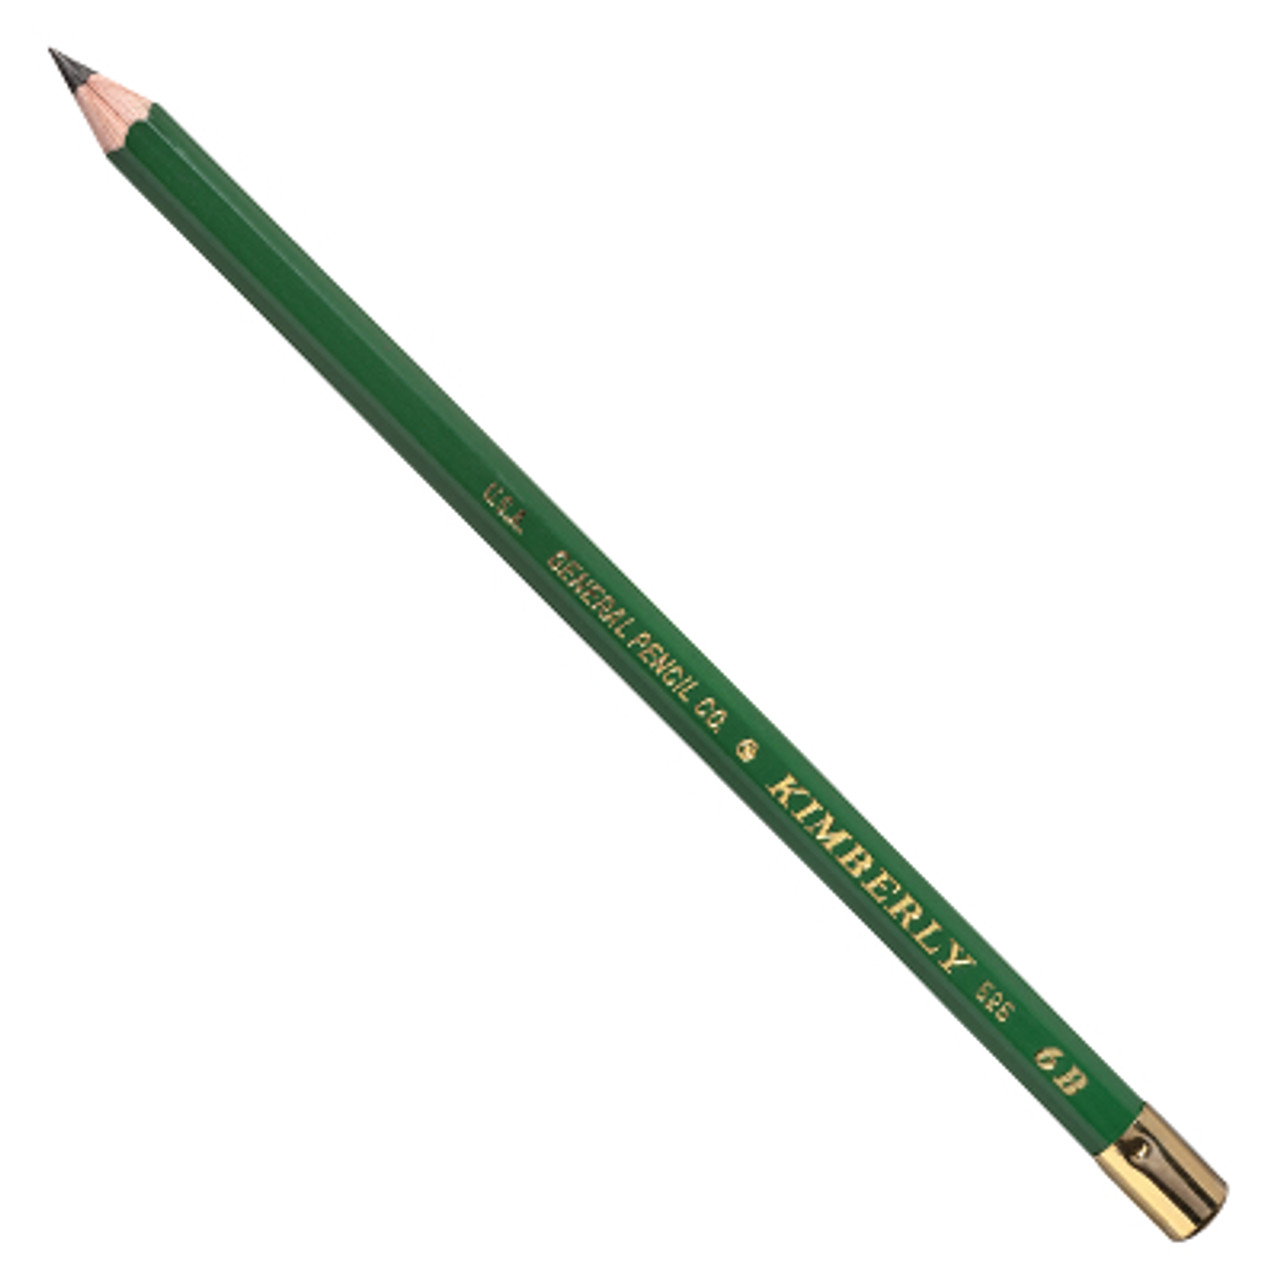 General's Solid Graphite Drawing Pencils